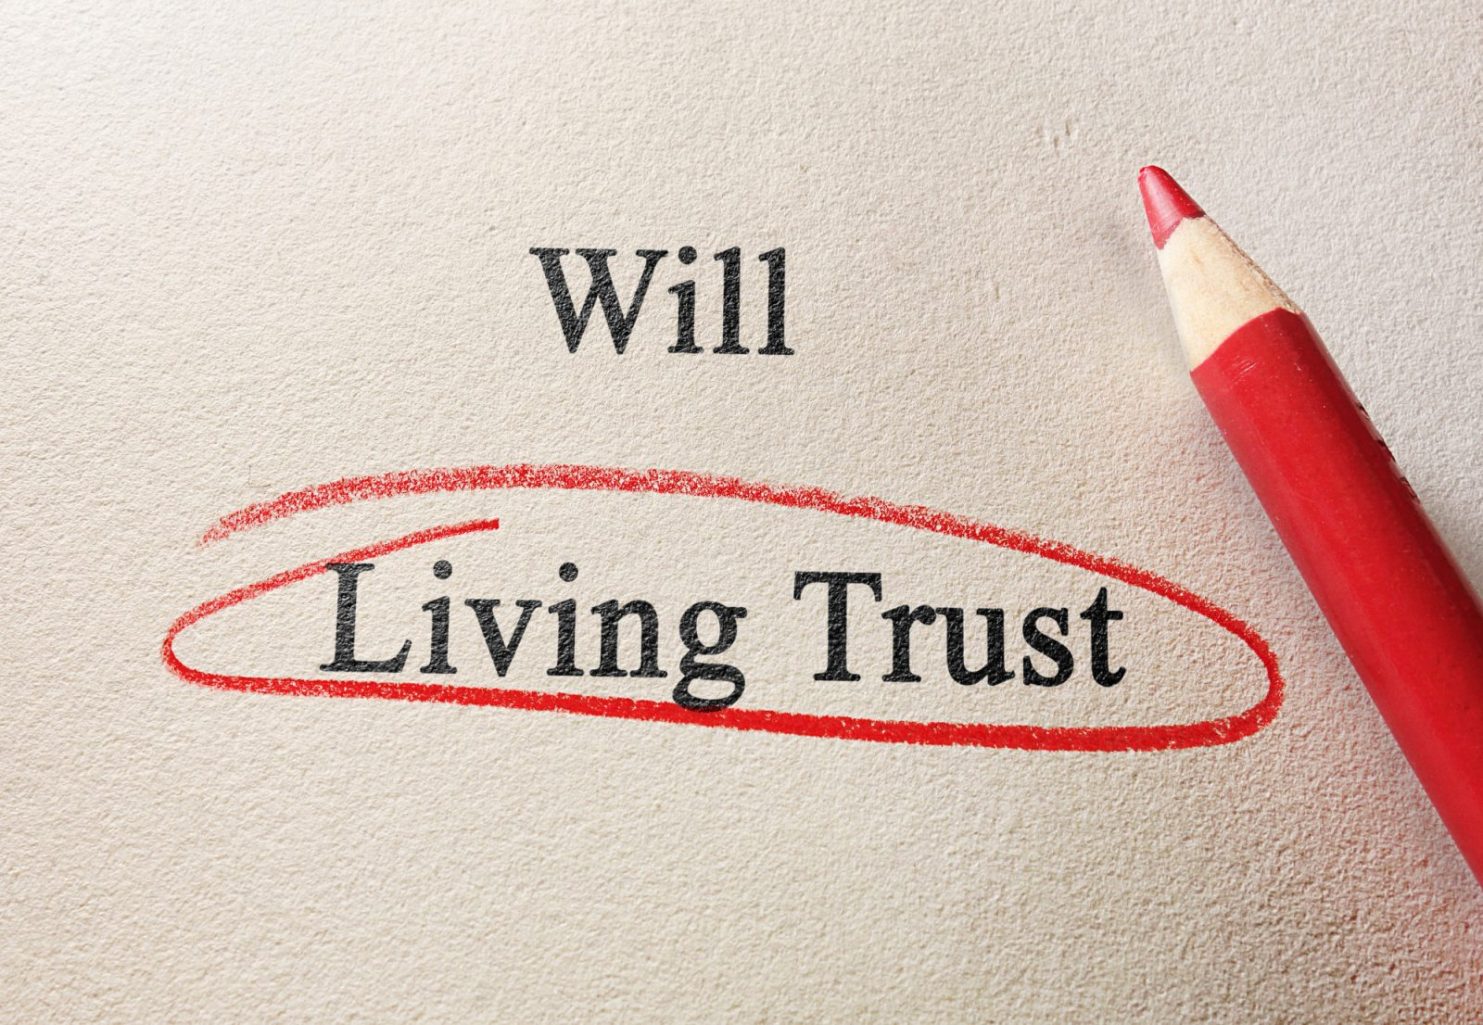 Living Will vs. Living Trust: What’s the Difference?